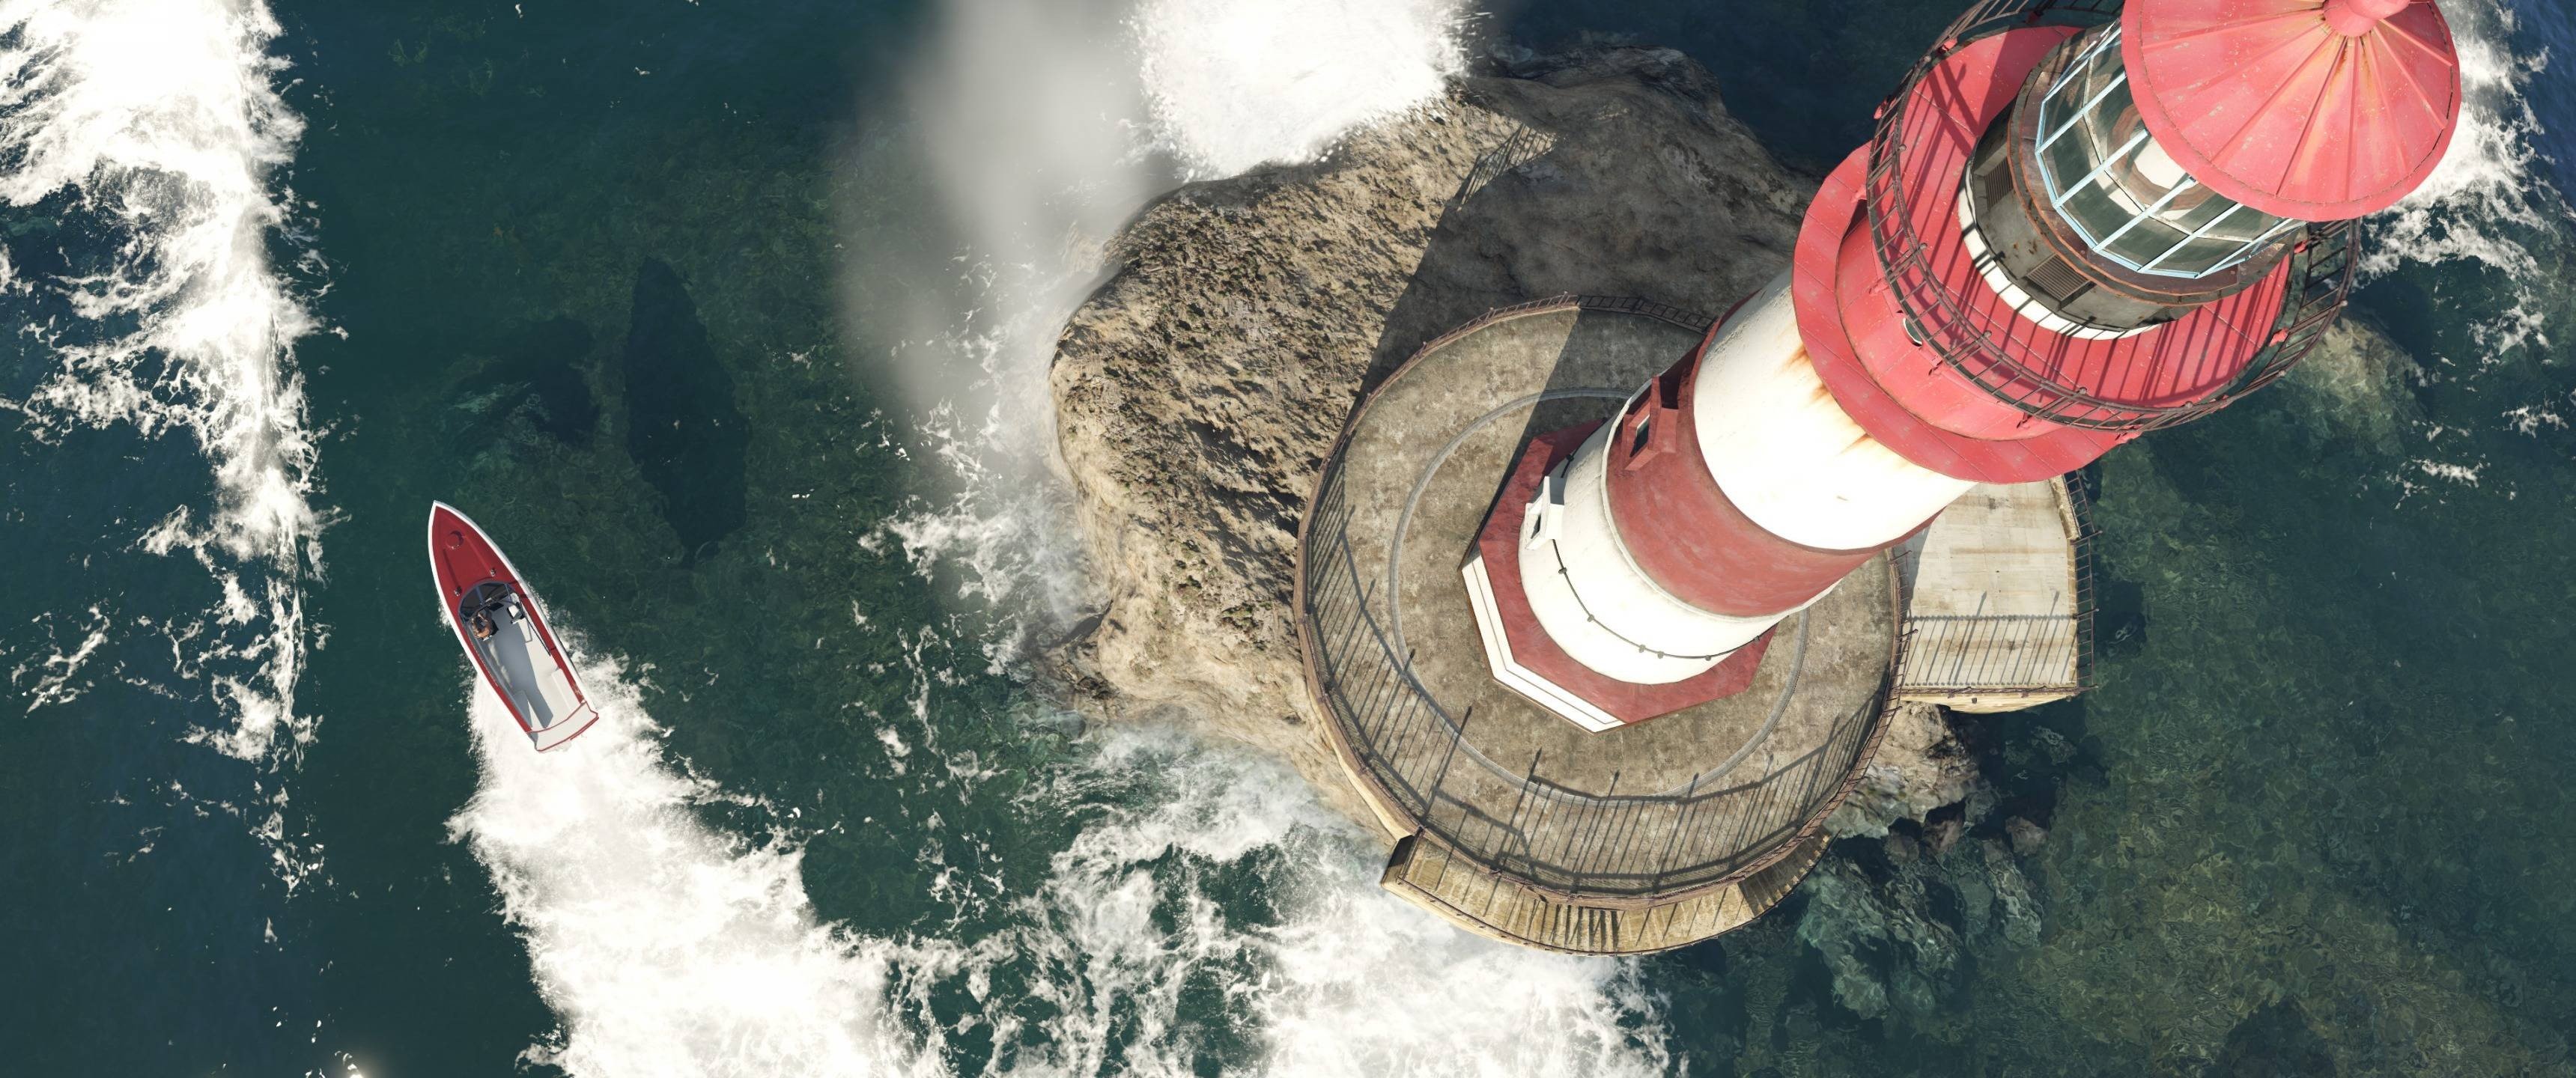 video games, Boat, Lighthouse, Screen shot, Grand Theft Auto V, Grand Theft Auto Wallpaper